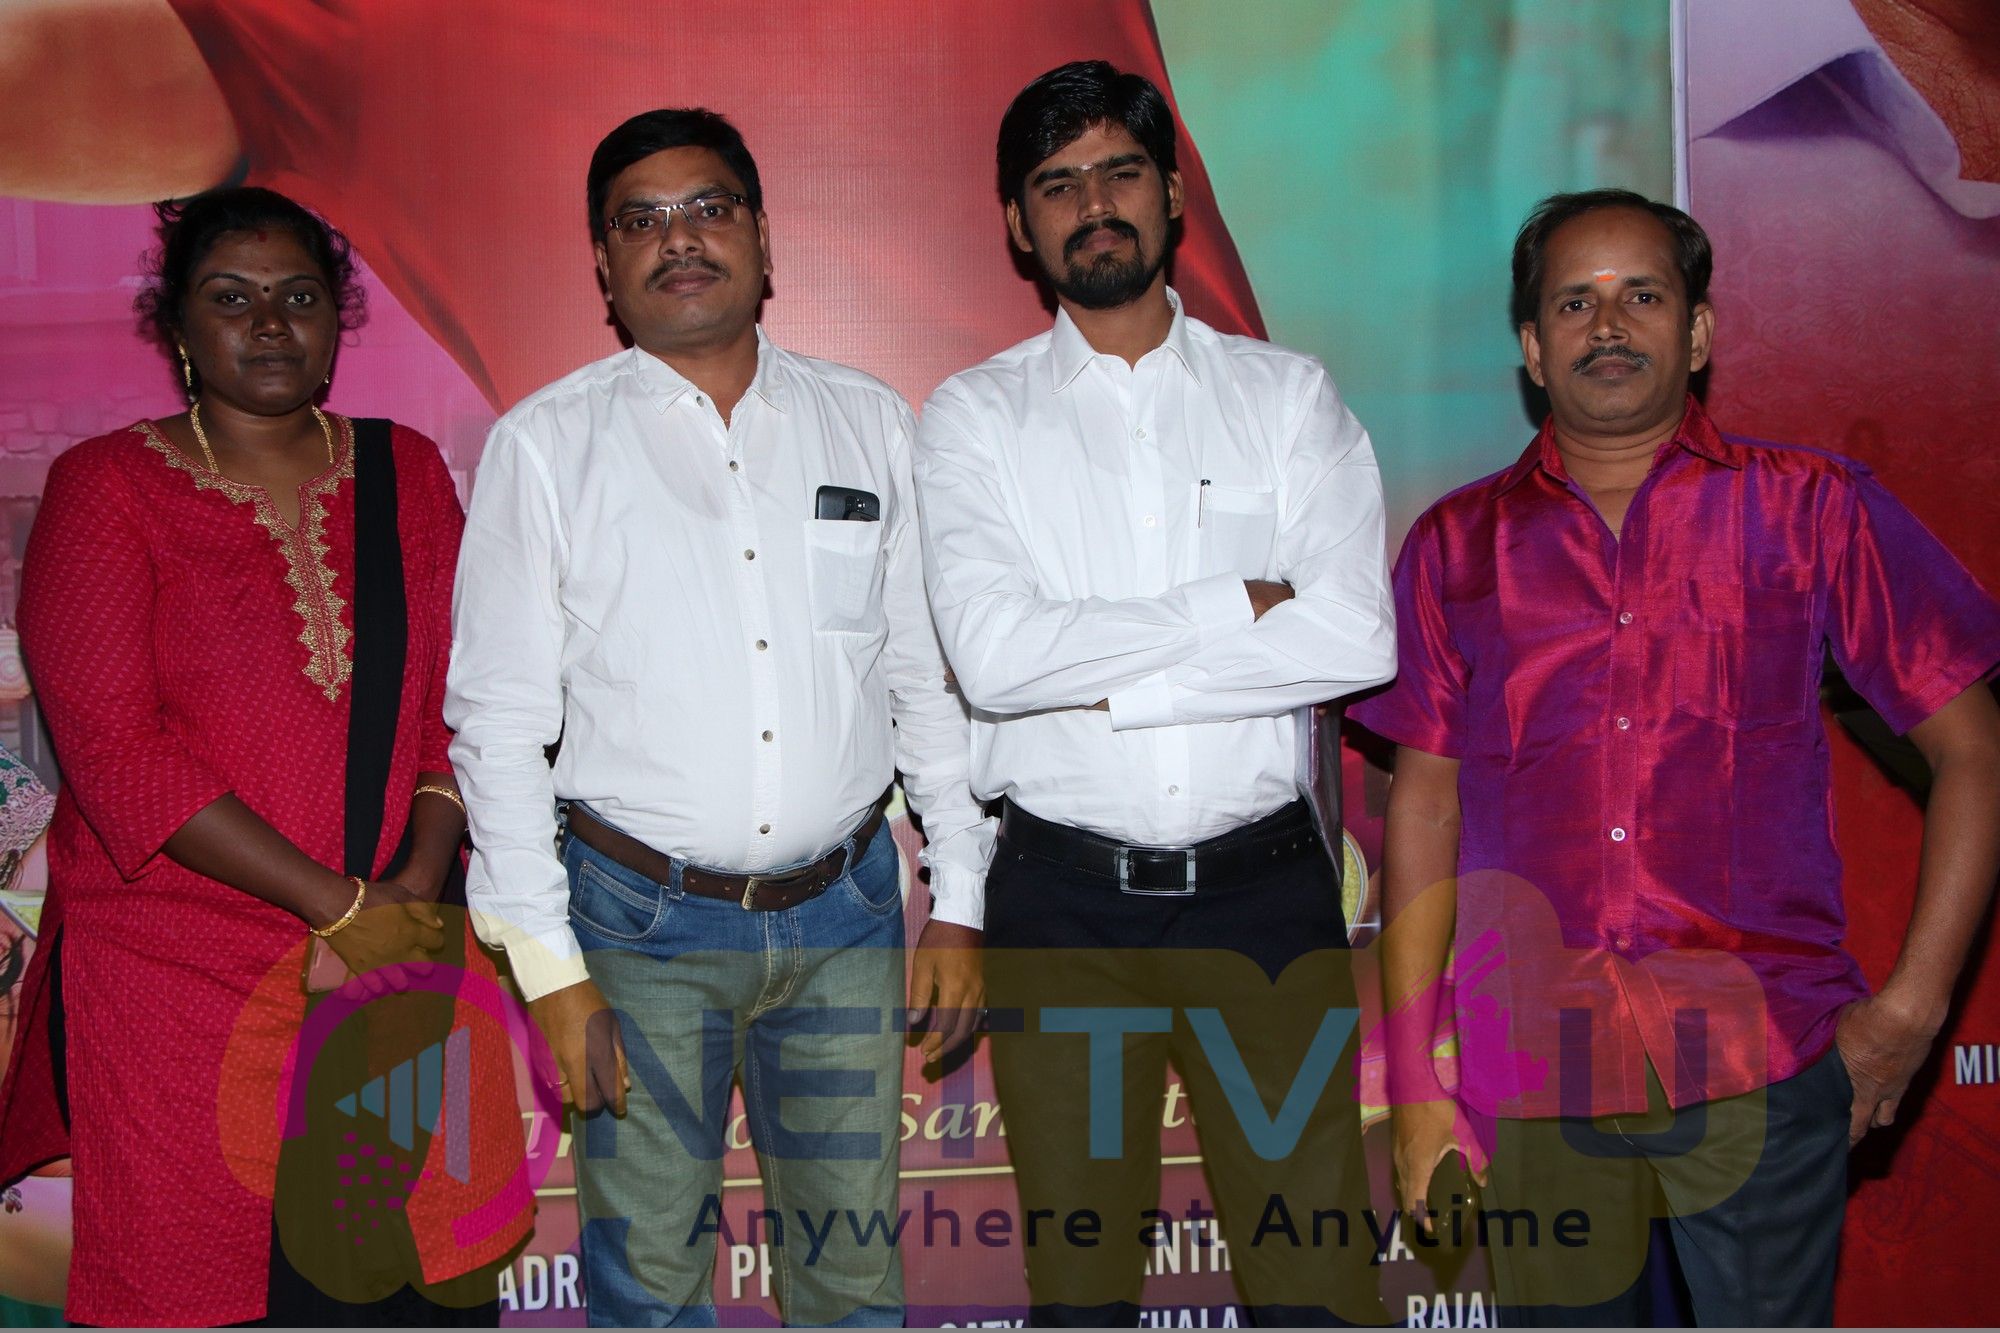 Anirudh Movie Audio Launch Images Tamil Gallery